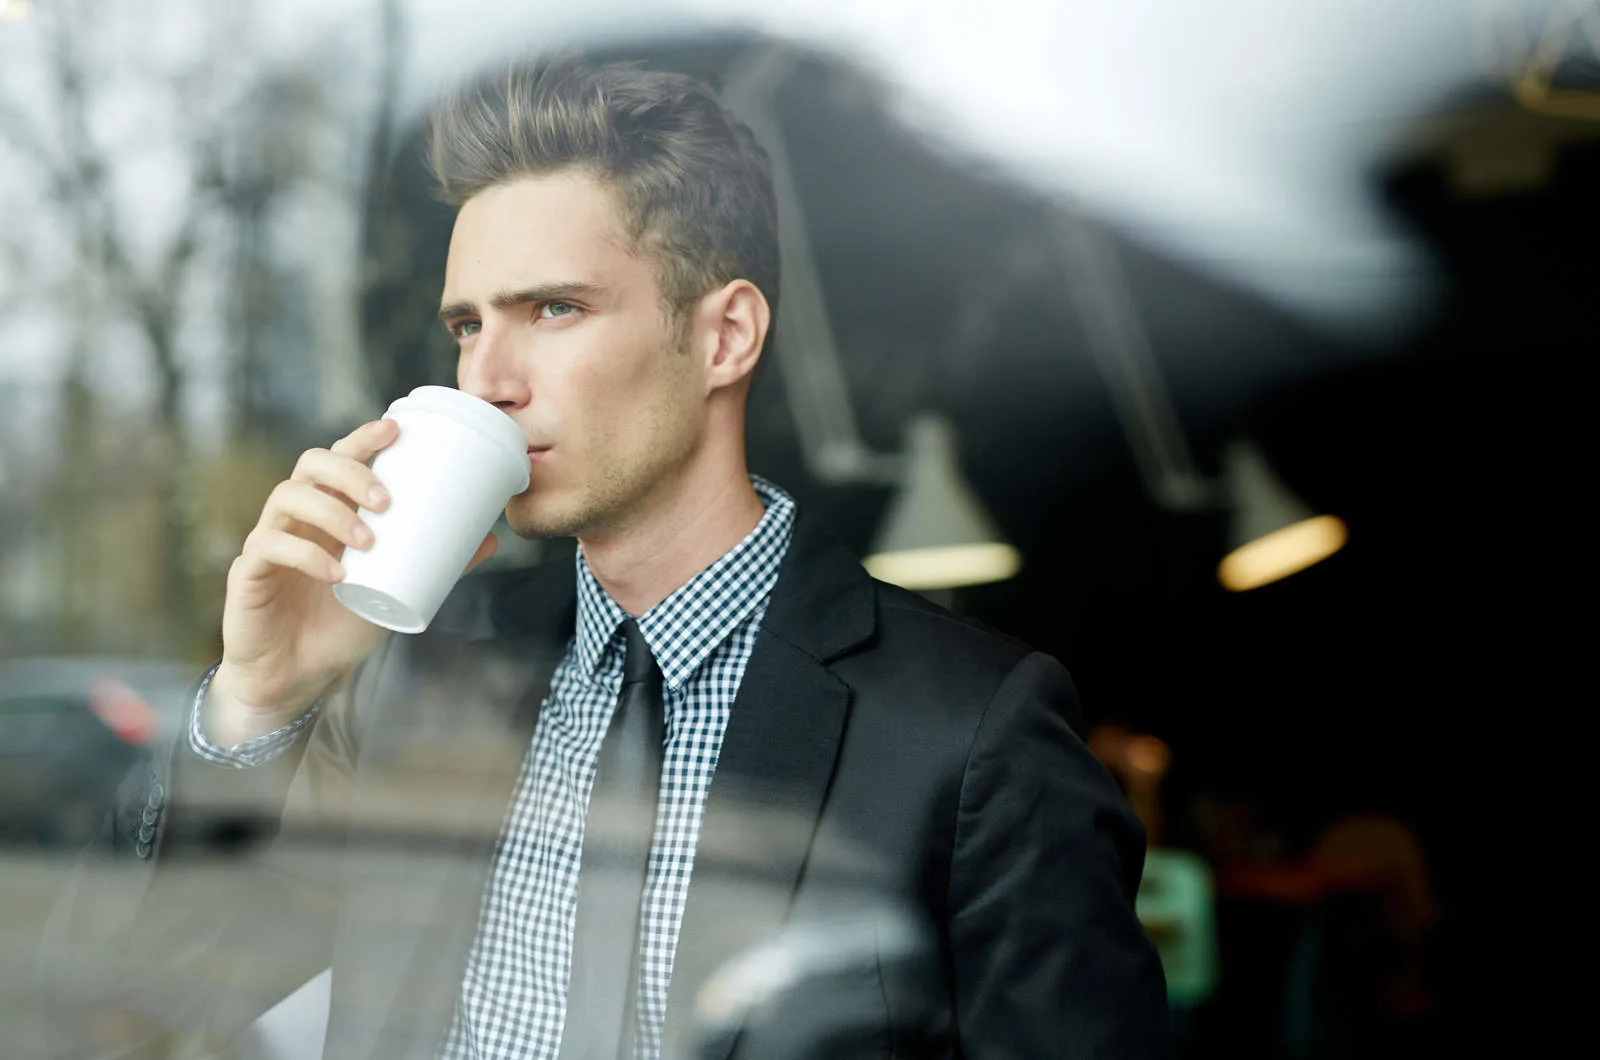 young man drinking coffee and looking through window